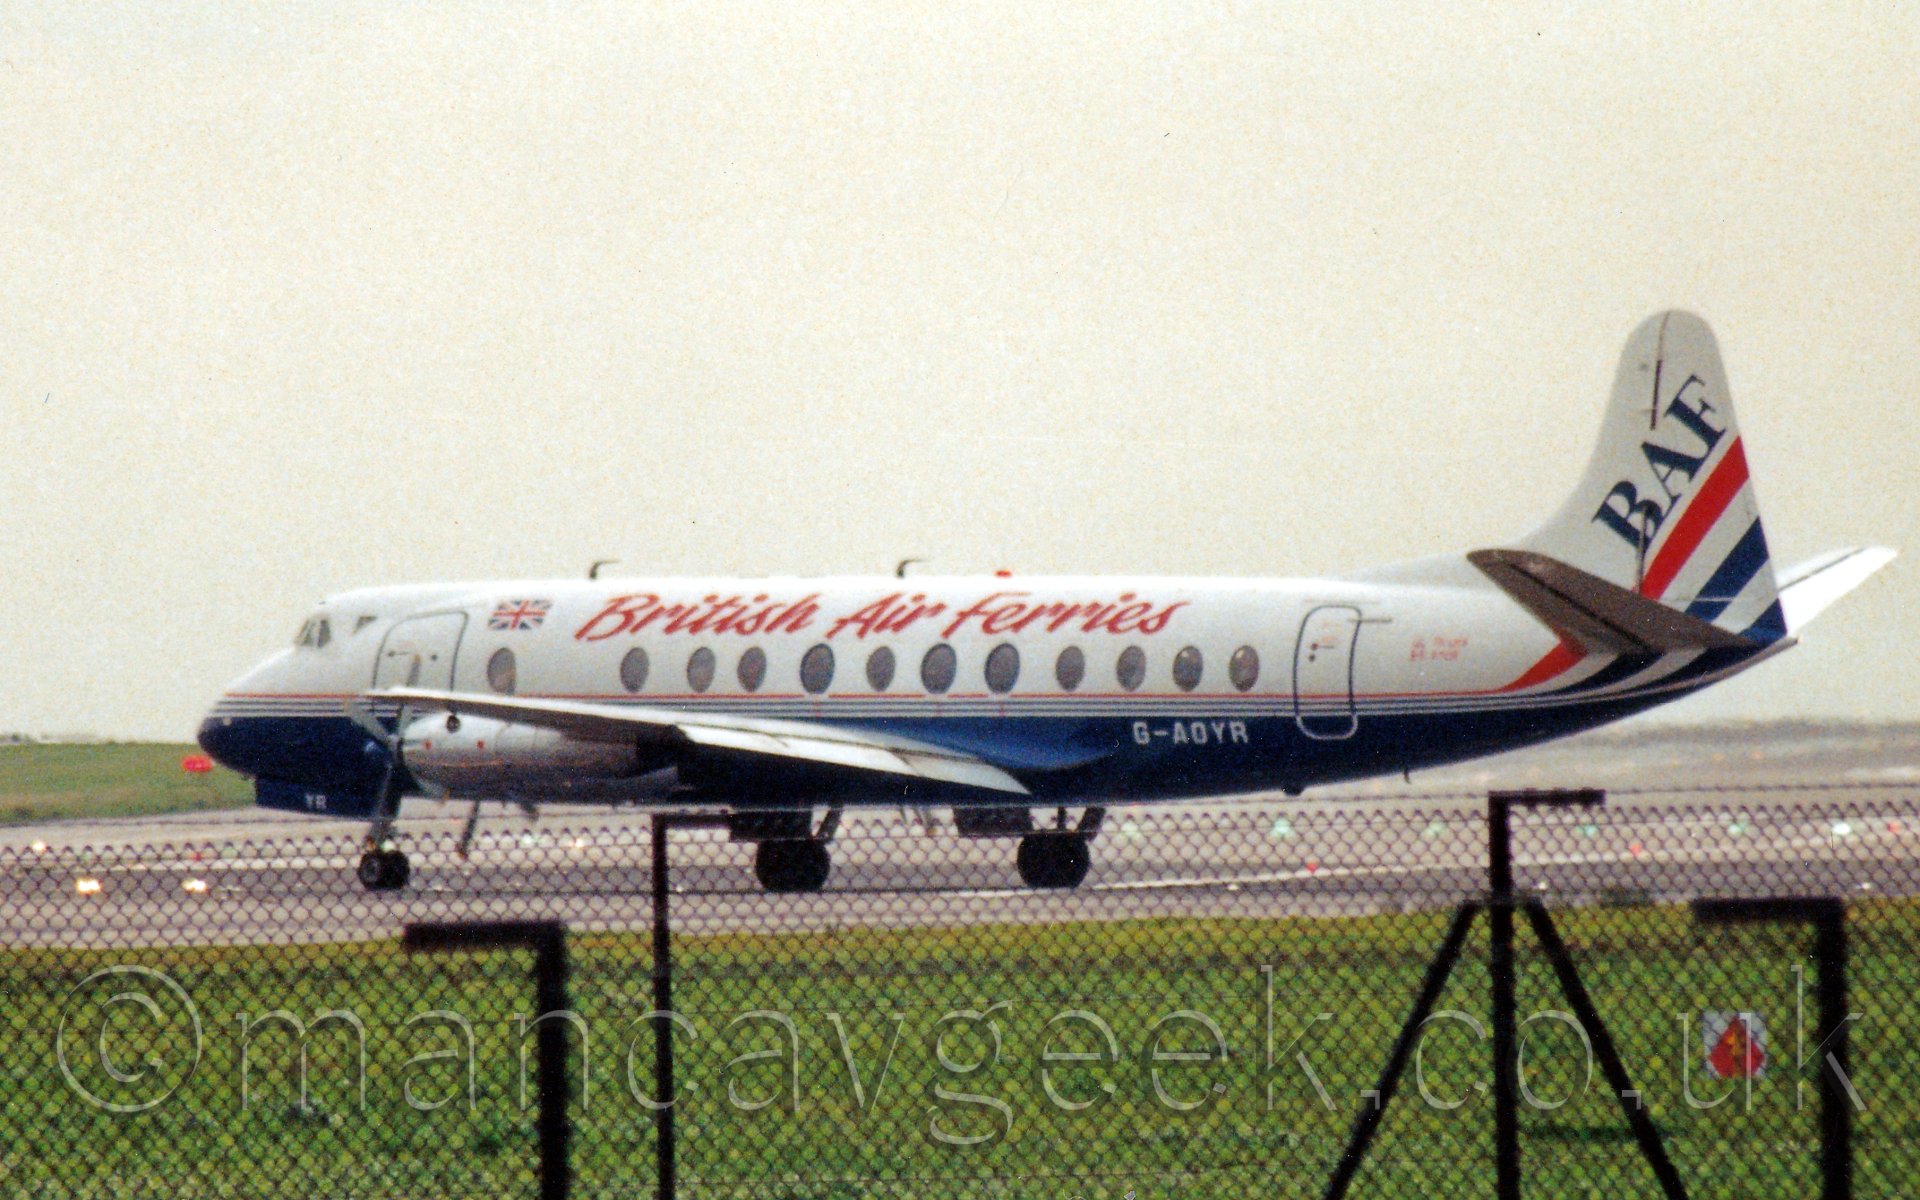 Side view of a white, 4 propellor engined airliner with a blue belly and red "British Air Ferries" titles on the upper fuselage, taxiing from right to left under a hazy but bright white sky.